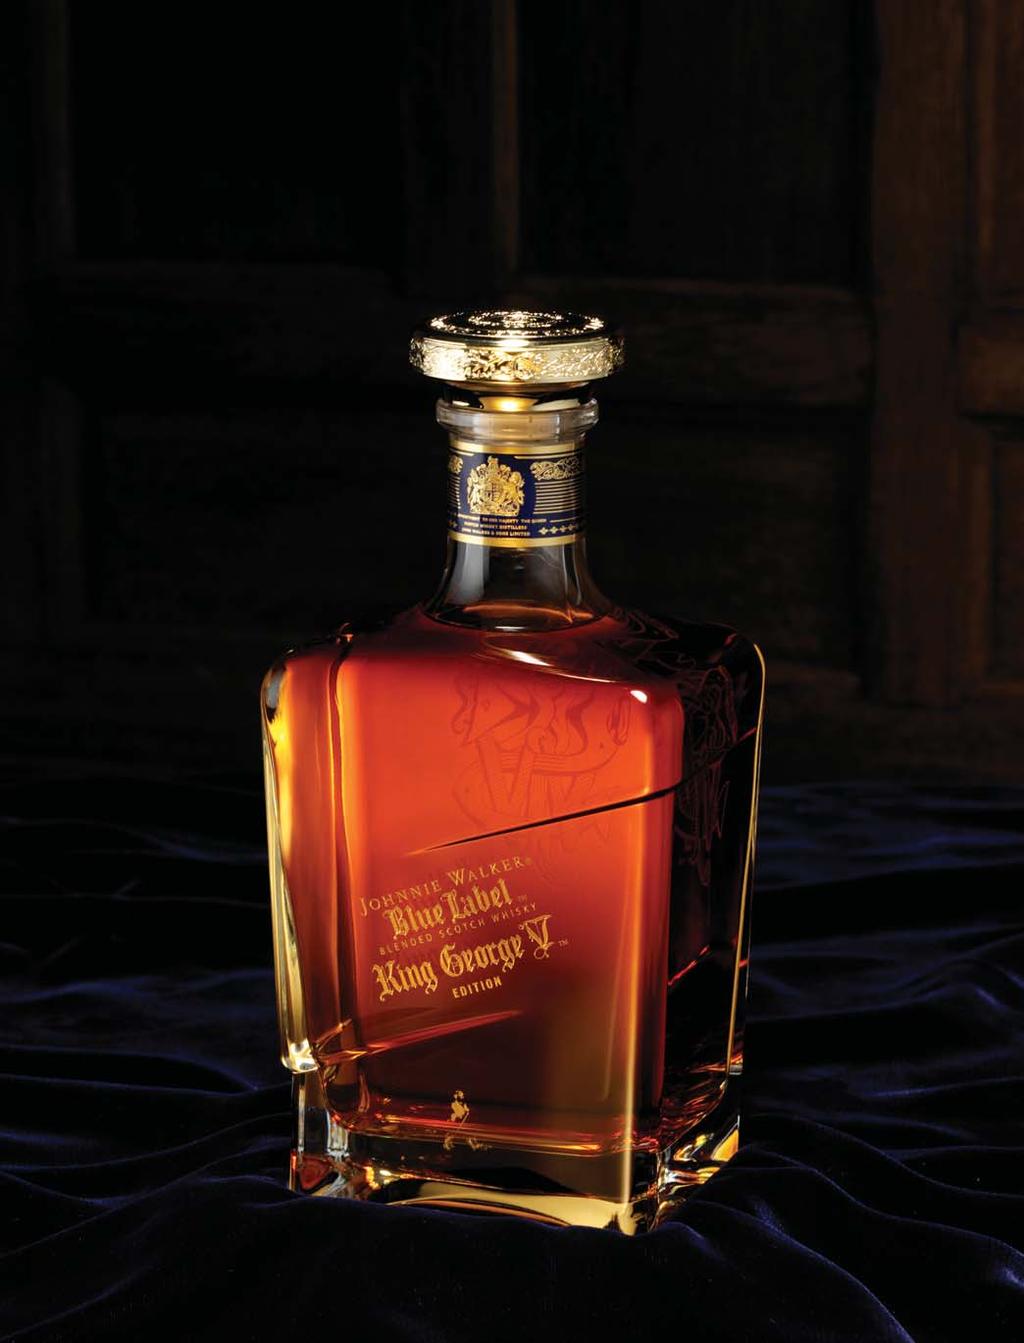 THE NOBLE CHOICE Johnnie Walker Blue Label King George V Edition The JOHNNIE WALKER, BLUE LABEL, KING